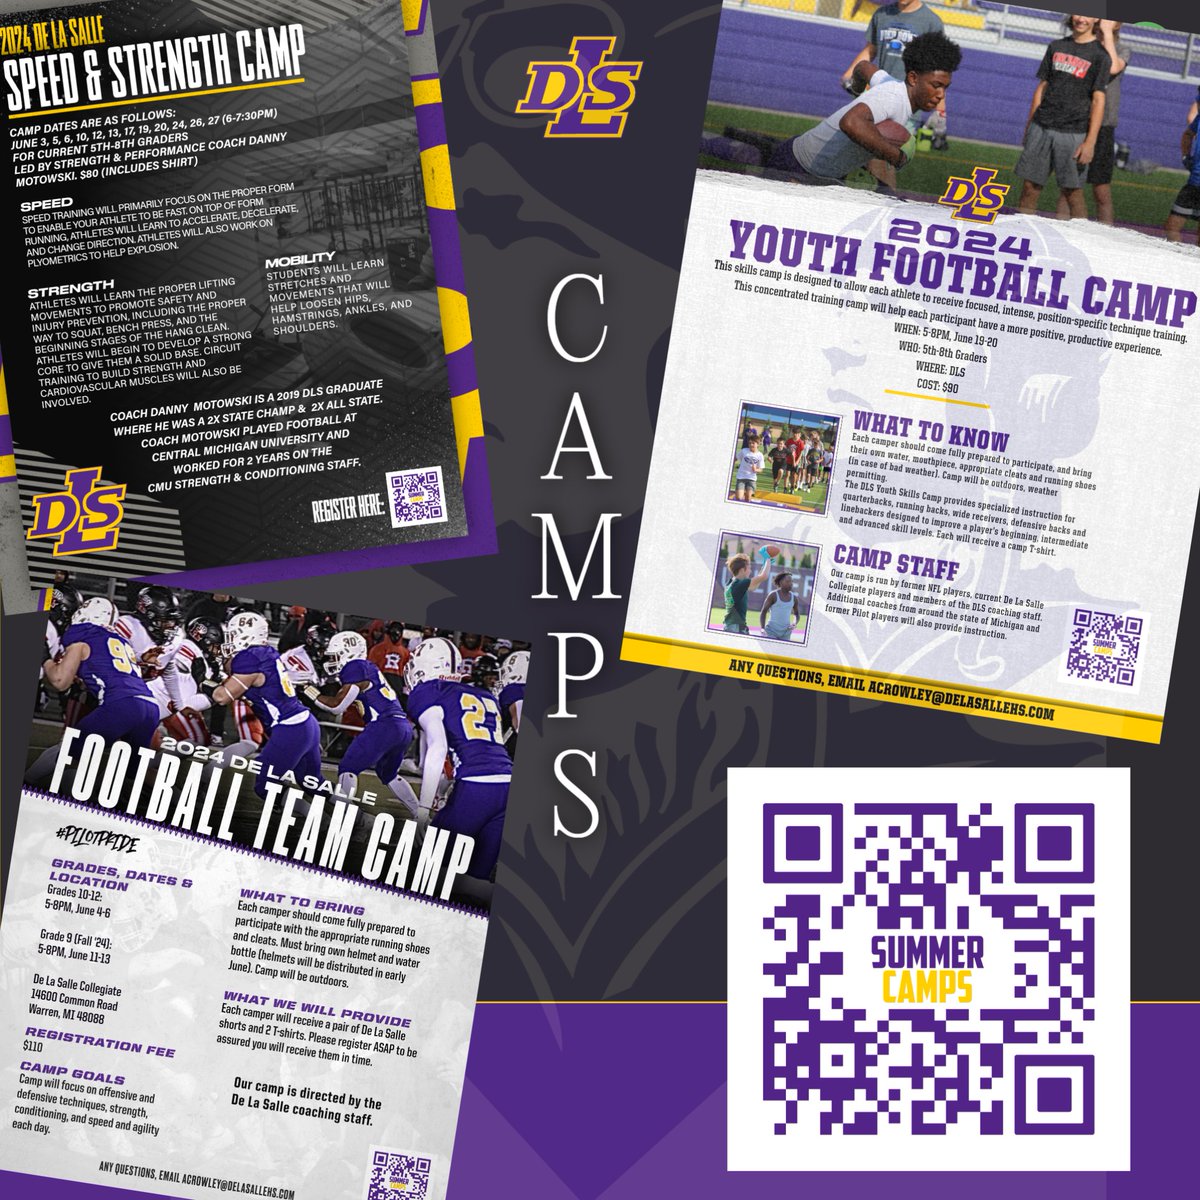 There's still time to sign up for the DLS Football Team Camp! Grades 10-12: 5-8PM, June 4-6 Grade 9 (Fall '24): 5-8PM, June 11-13 ... focusing on offensive and defensive techniques, strength, conditioning, and speed & agility each day. Use the QR code to register! @coachrohn